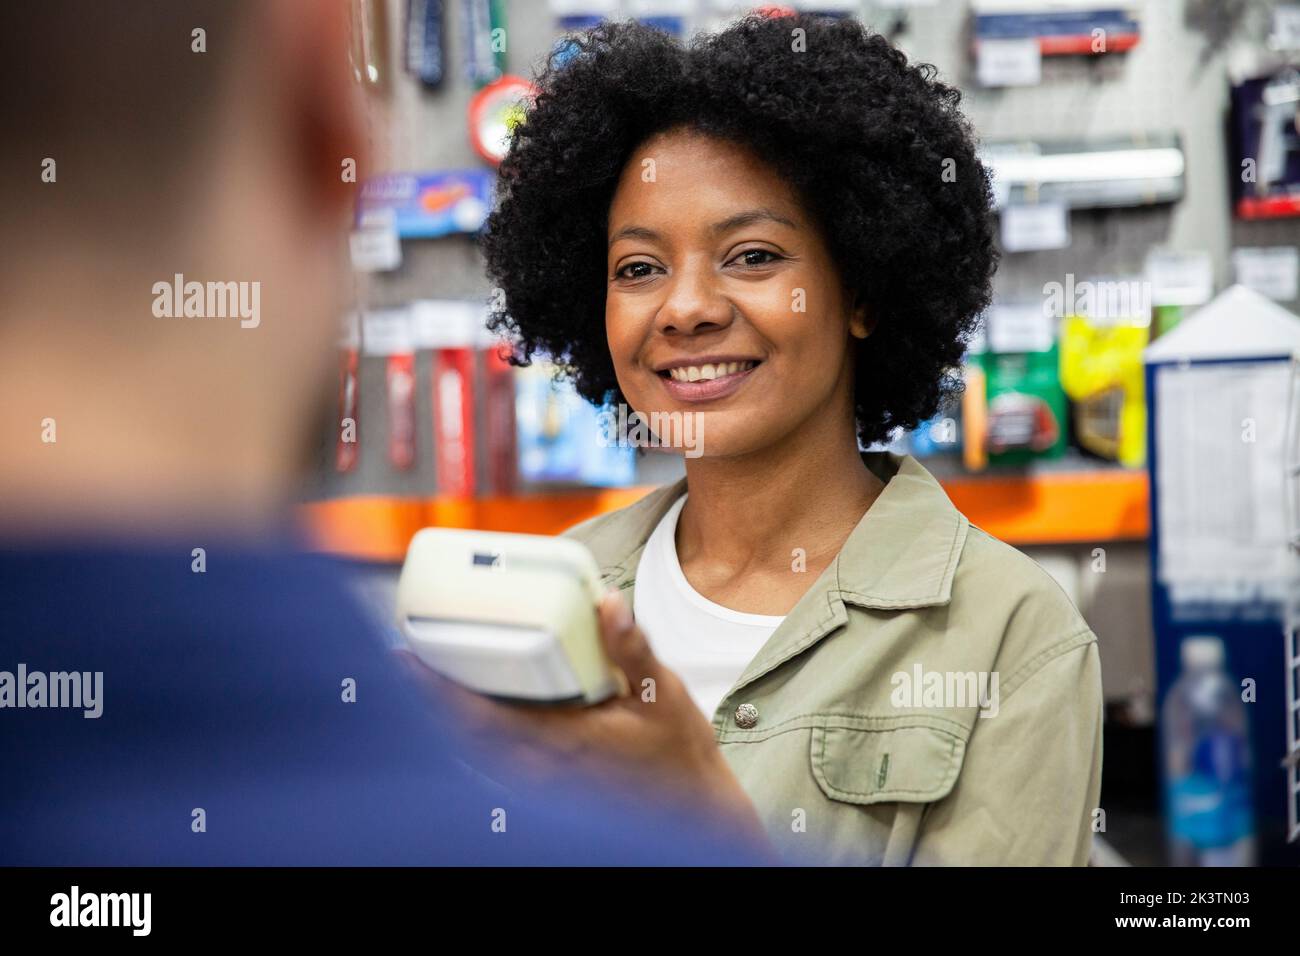 African American female hardware shop worker attending customer at store Stock Photo